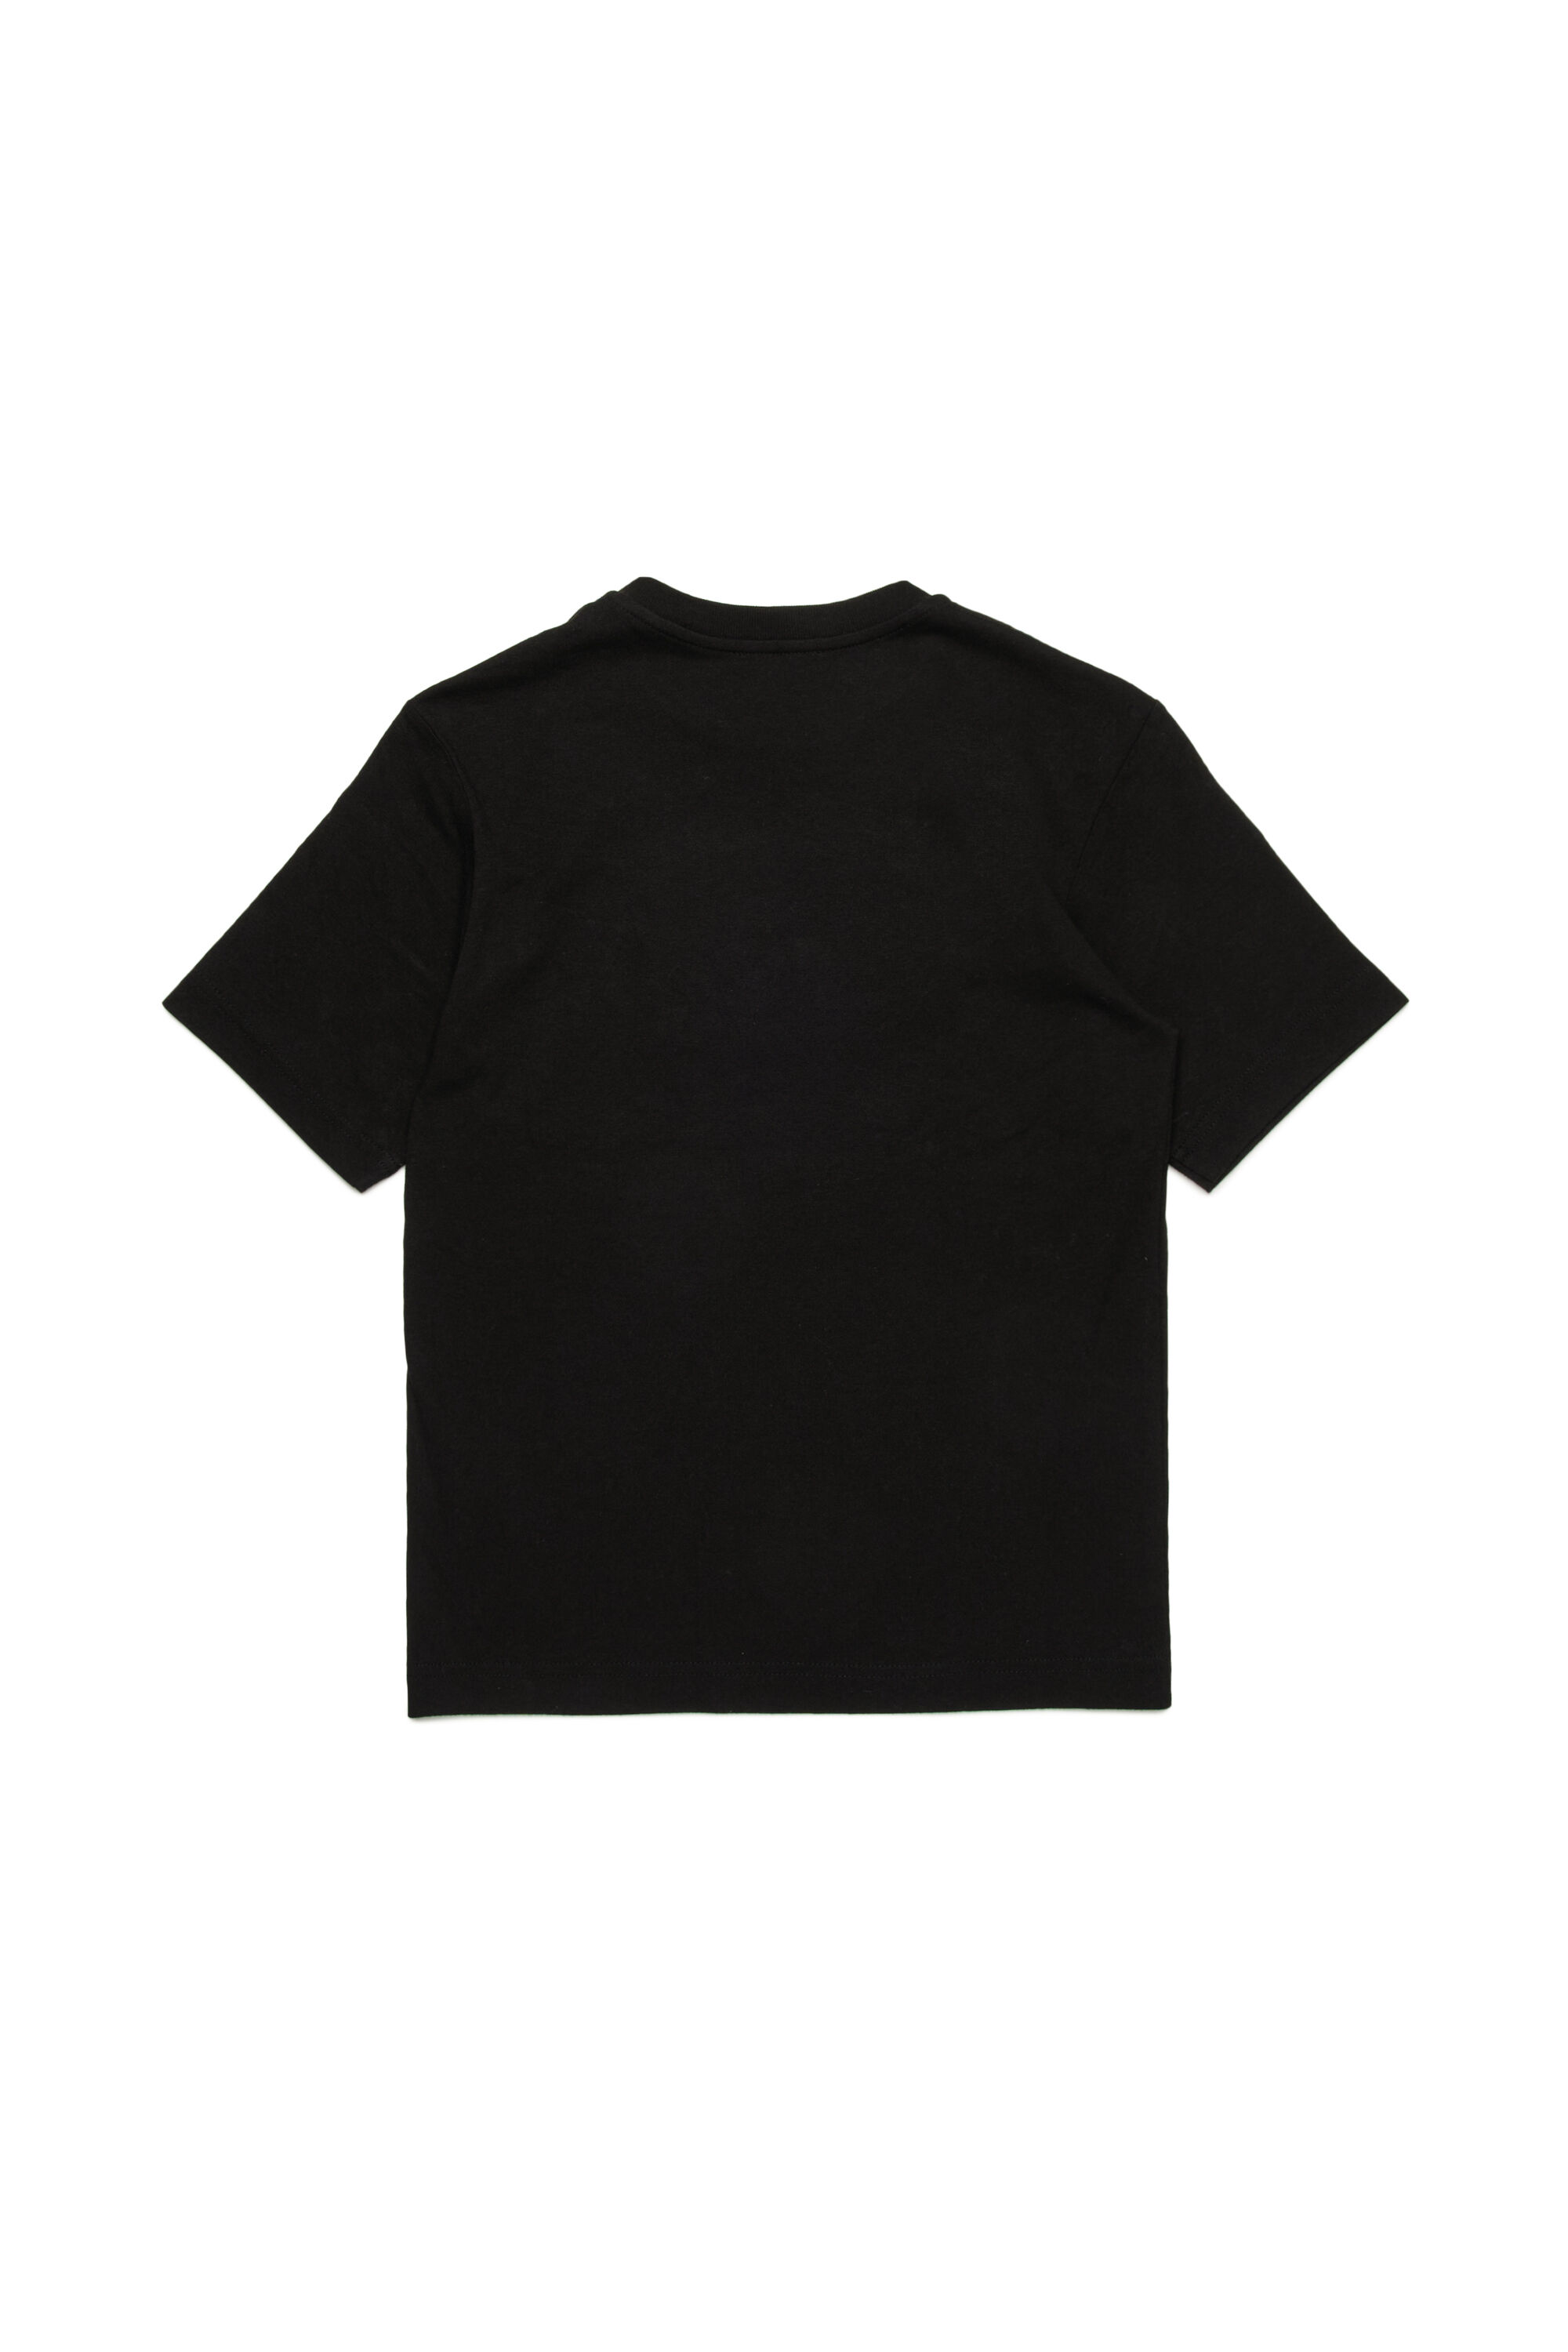 T-shirt with Oval D outline logo | Black | 4-16 YEARS Boys | Diesel